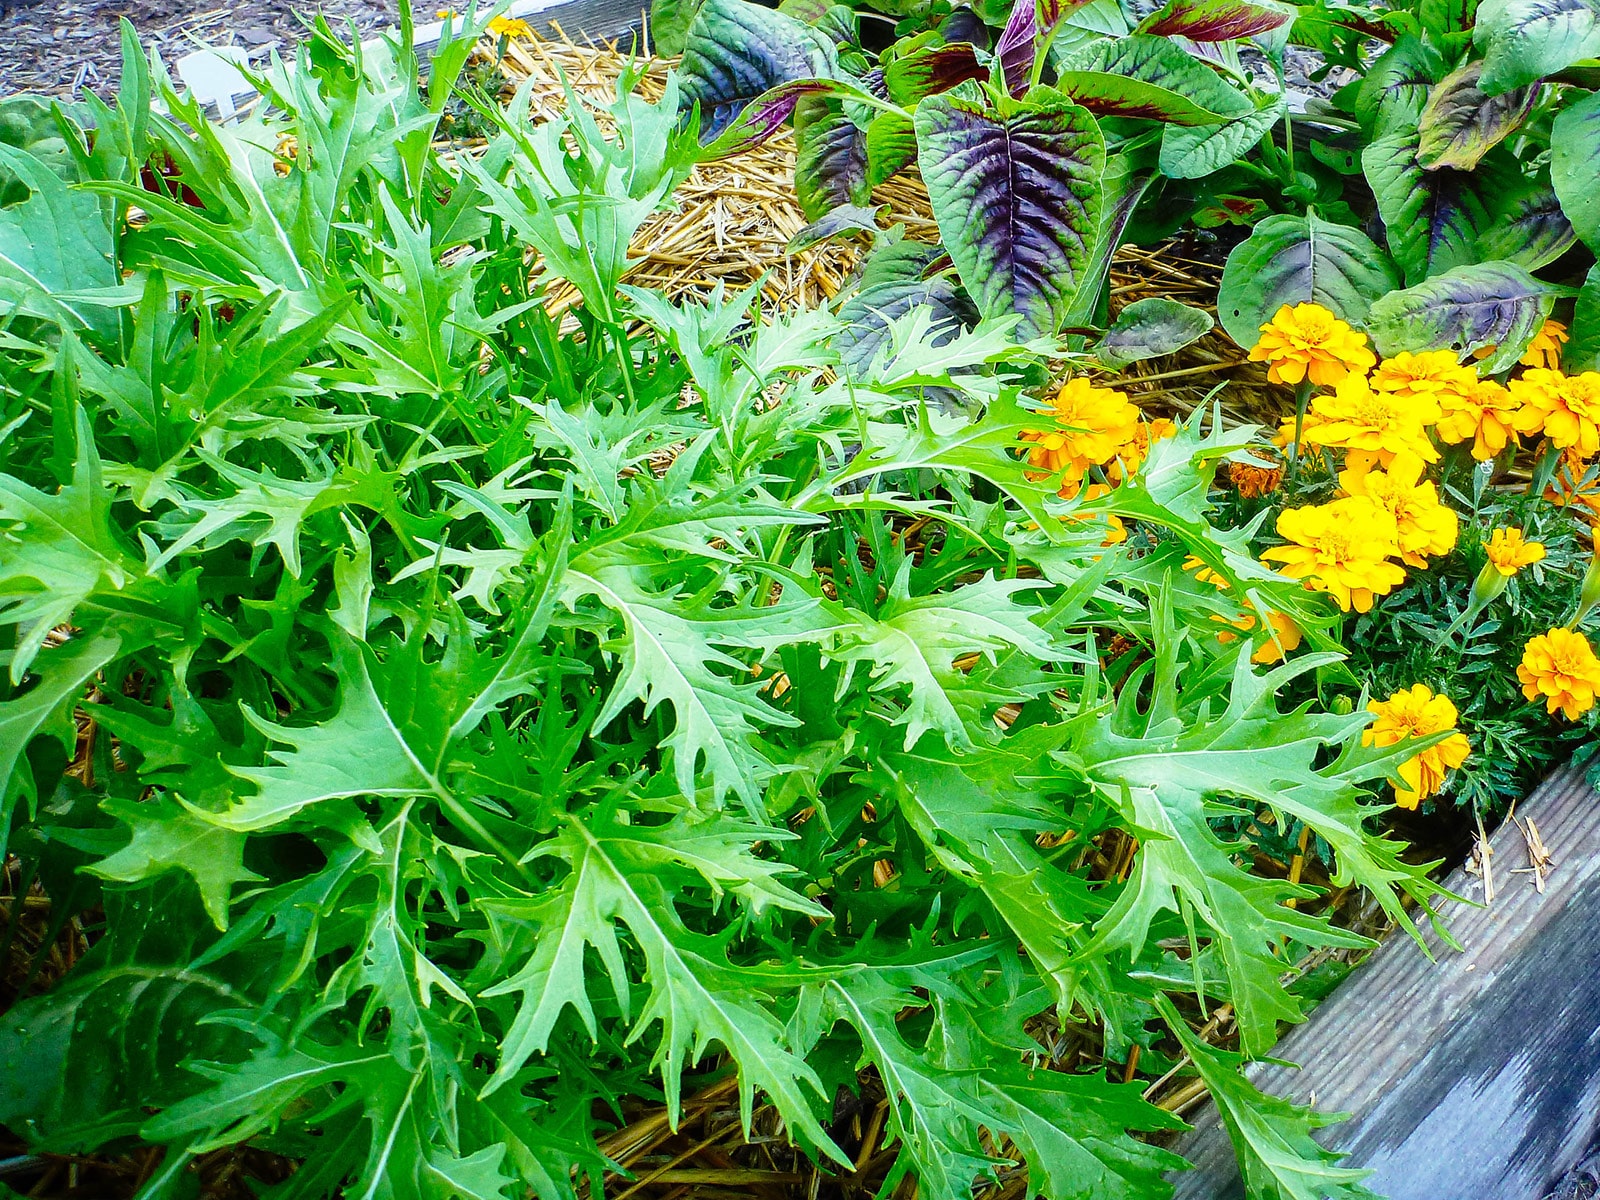 Mizuna growing in a garden bed with marigolds and edible red leaf amaranth